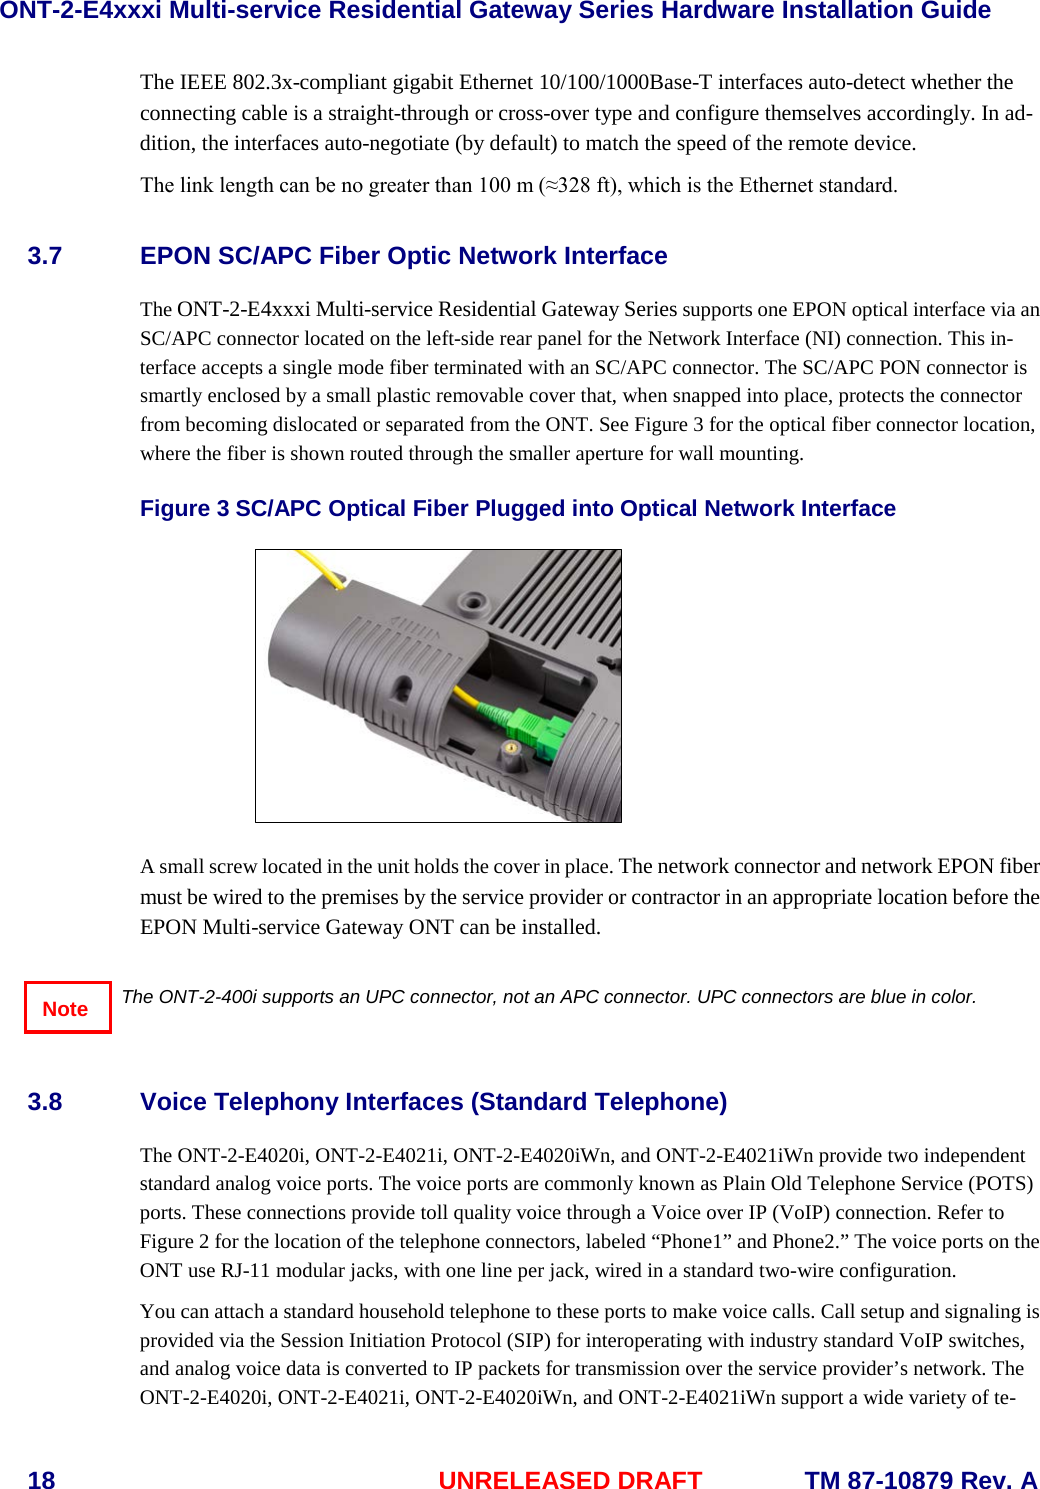 ONT-2-E4xxxi Multi-service Residential Gateway Series Hardware Installation Guide  18 UNRELEASED DRAFT    TM 87-10879 Rev. A The IEEE 802.3x-compliant gigabit Ethernet 10/100/1000Base-T interfaces auto-detect whether the connecting cable is a straight-through or cross-over type and configure themselves accordingly. In ad-dition, the interfaces auto-negotiate (by default) to match the speed of the remote device.  The link length can be no greater than 100 m (≈328 ft), which is the Ethernet standard.   3.7 EPON SC/APC Fiber Optic Network Interface The ONT-2-E4xxxi Multi-service Residential Gateway Series supports one EPON optical interface via an SC/APC connector located on the left-side rear panel for the Network Interface (NI) connection. This in-terface accepts a single mode fiber terminated with an SC/APC connector. The SC/APC PON connector is smartly enclosed by a small plastic removable cover that, when snapped into place, protects the connector from becoming dislocated or separated from the ONT. See Figure 3 for the optical fiber connector location, where the fiber is shown routed through the smaller aperture for wall mounting.    Figure 3 SC/APC Optical Fiber Plugged into Optical Network Interface   A small screw located in the unit holds the cover in place. The network connector and network EPON fiber must be wired to the premises by the service provider or contractor in an appropriate location before the EPON Multi-service Gateway ONT can be installed.     The ONT-2-400i supports an UPC connector, not an APC connector. UPC connectors are blue in color.  3.8 Voice Telephony Interfaces (Standard Telephone) The ONT-2-E4020i, ONT-2-E4021i, ONT-2-E4020iWn, and ONT-2-E4021iWn provide two independent standard analog voice ports. The voice ports are commonly known as Plain Old Telephone Service (POTS) ports. These connections provide toll quality voice through a Voice over IP (VoIP) connection. Refer to Figure 2 for the location of the telephone connectors, labeled “Phone1” and Phone2.” The voice ports on the ONT use RJ-11 modular jacks, with one line per jack, wired in a standard two-wire configuration.     You can attach a standard household telephone to these ports to make voice calls. Call setup and signaling is provided via the Session Initiation Protocol (SIP) for interoperating with industry standard VoIP switches, and analog voice data is converted to IP packets for transmission over the service provider’s network. The ONT-2-E4020i, ONT-2-E4021i, ONT-2-E4020iWn, and ONT-2-E4021iWn support a wide variety of te-Note 